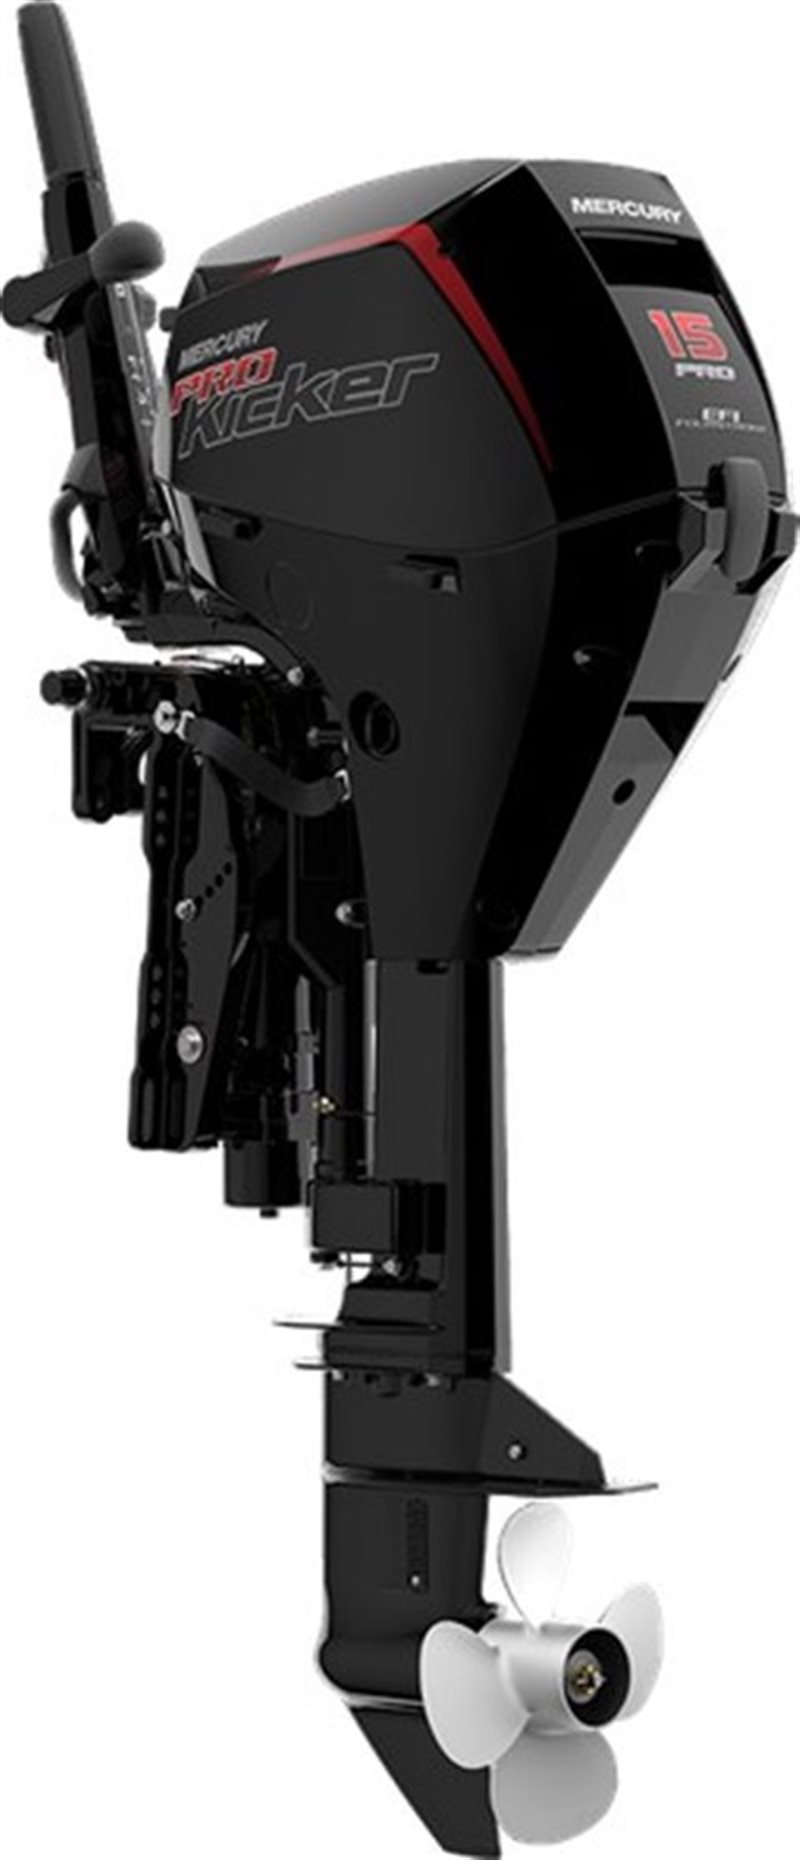 2020 Mercury Outboard FourStroke 15-20 hp 15 EFI at Fort Fremont Marine